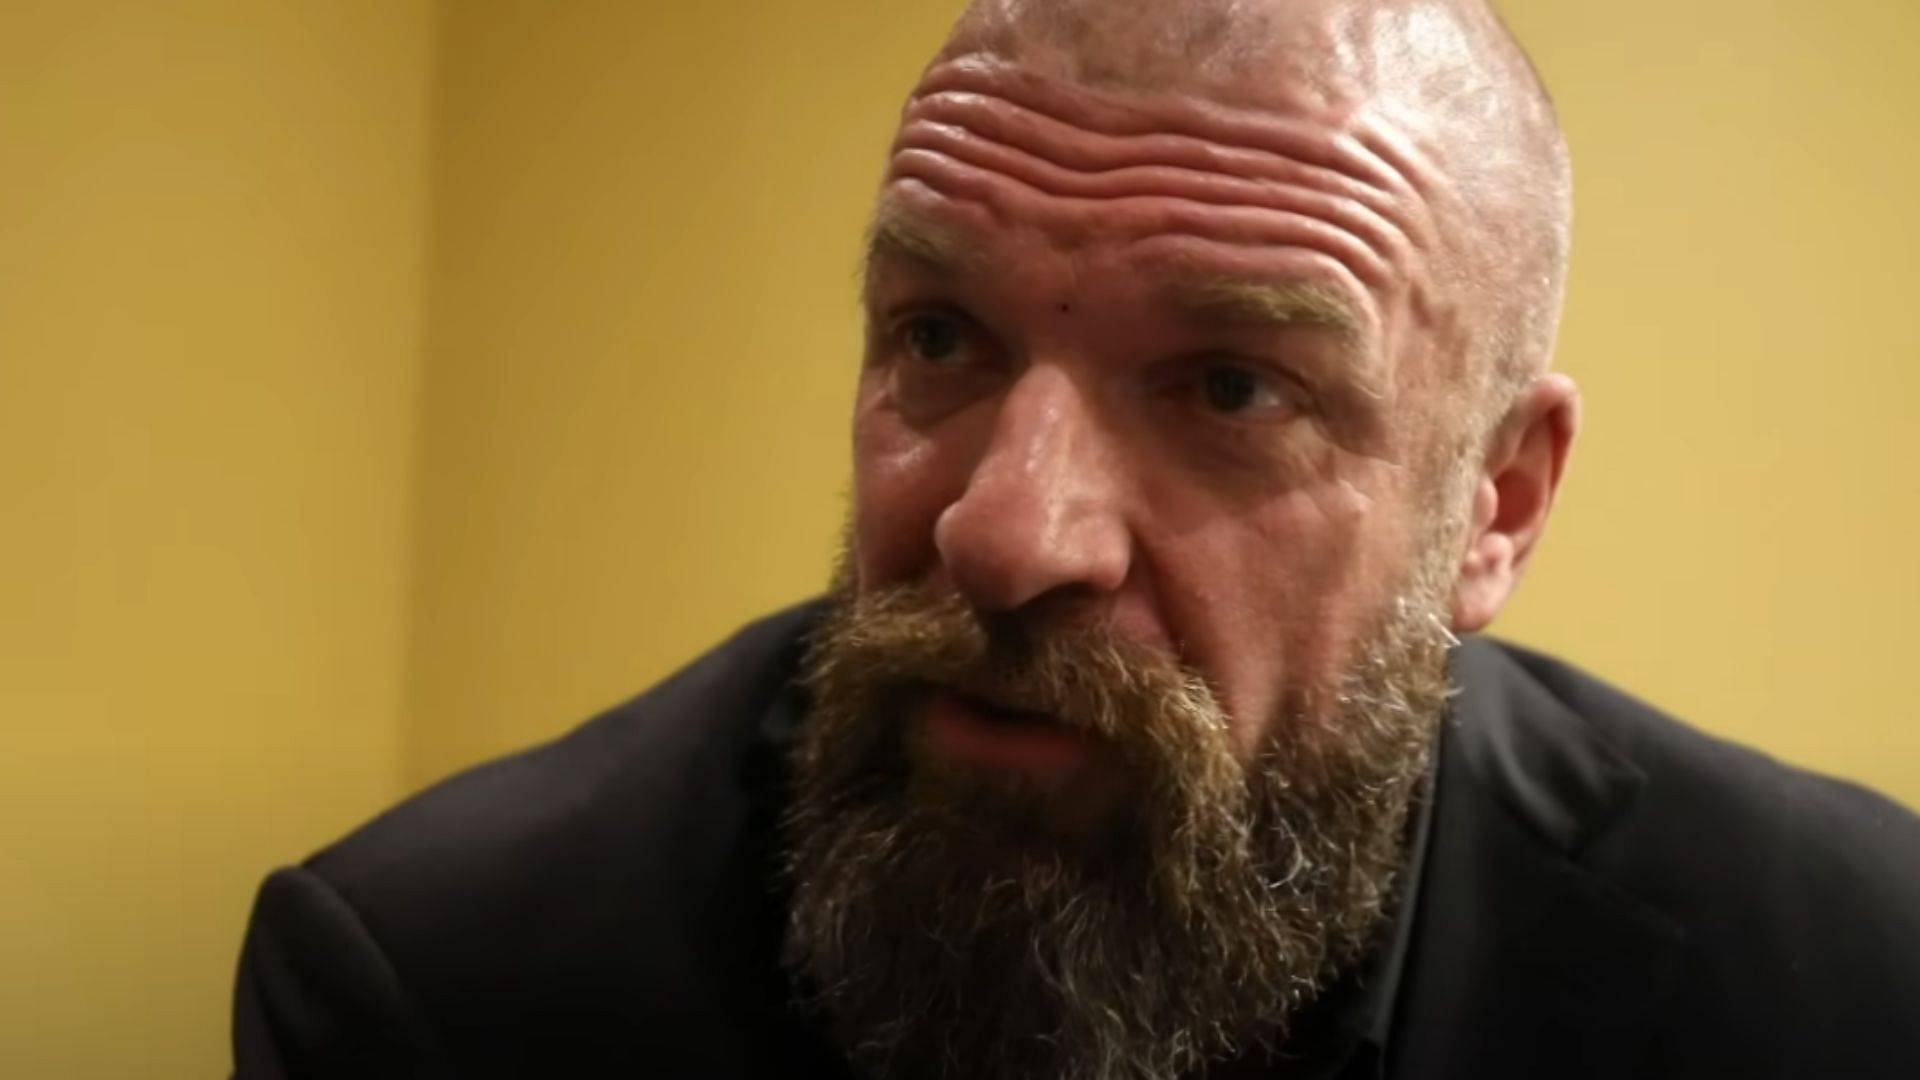 Paul Levesque (Triple H) founded NXT in 2010.